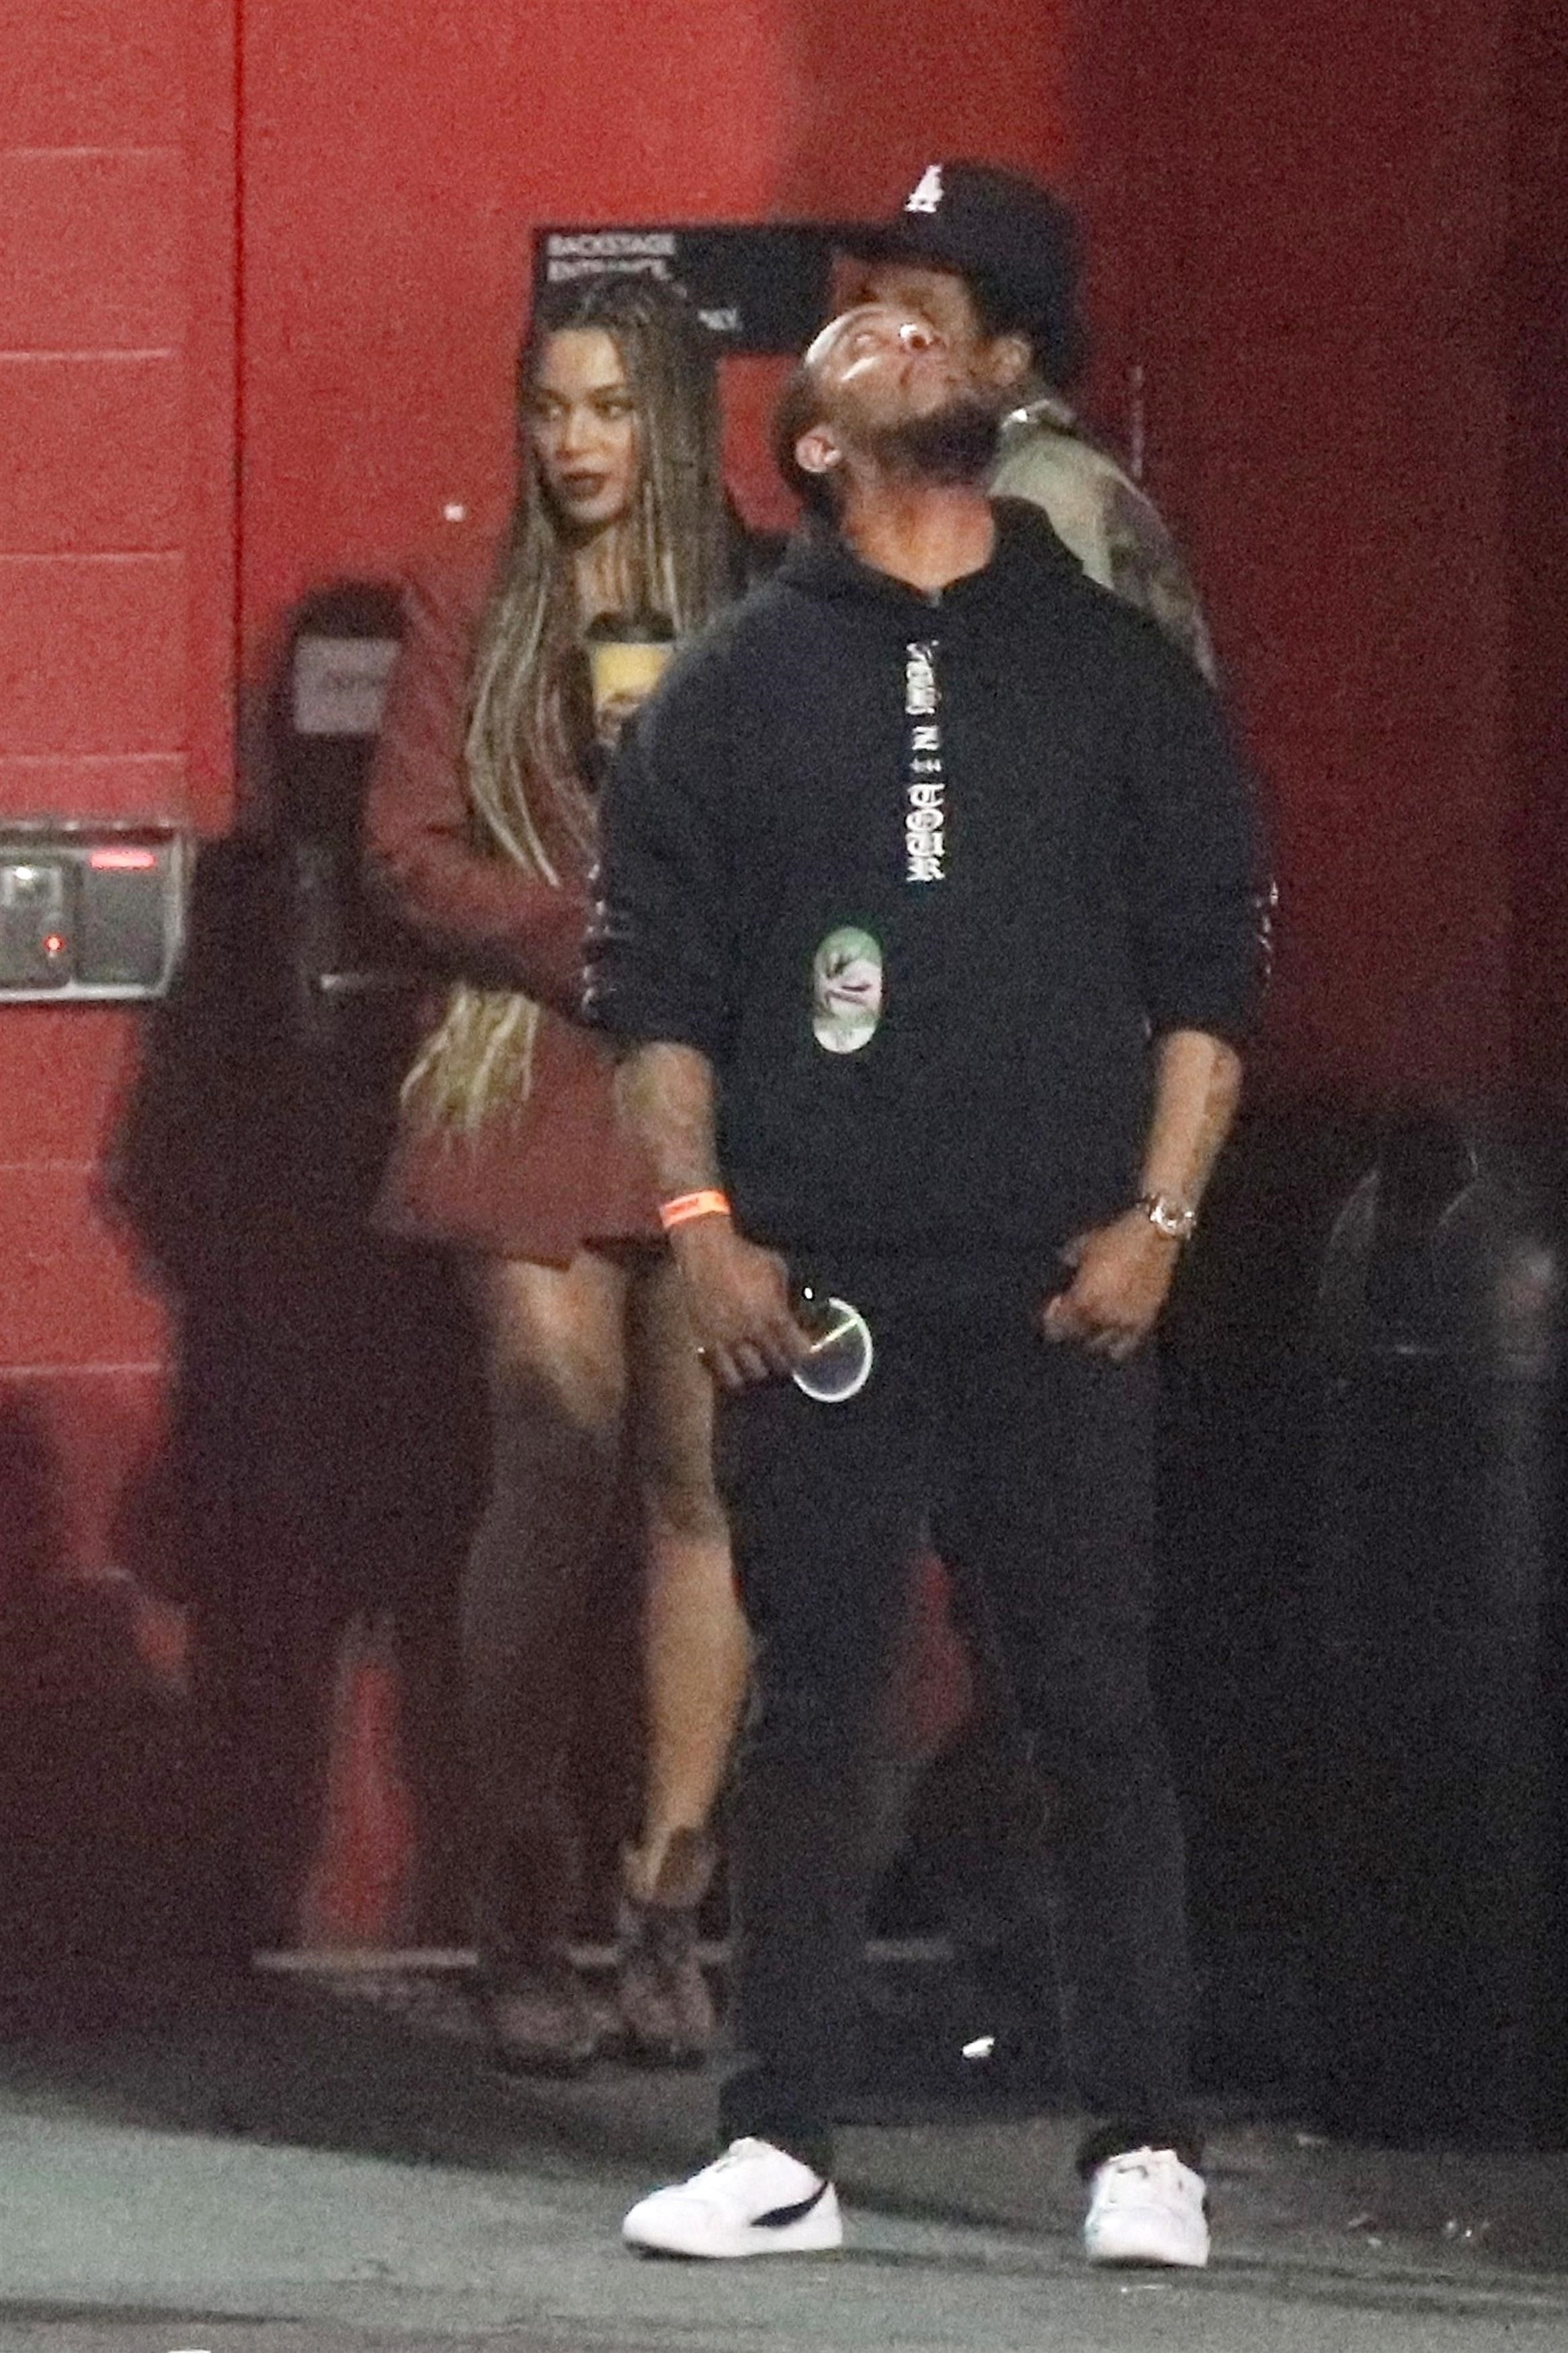 Beyonce and Jay-Z at the Travis Scott Concert in Los Angeles